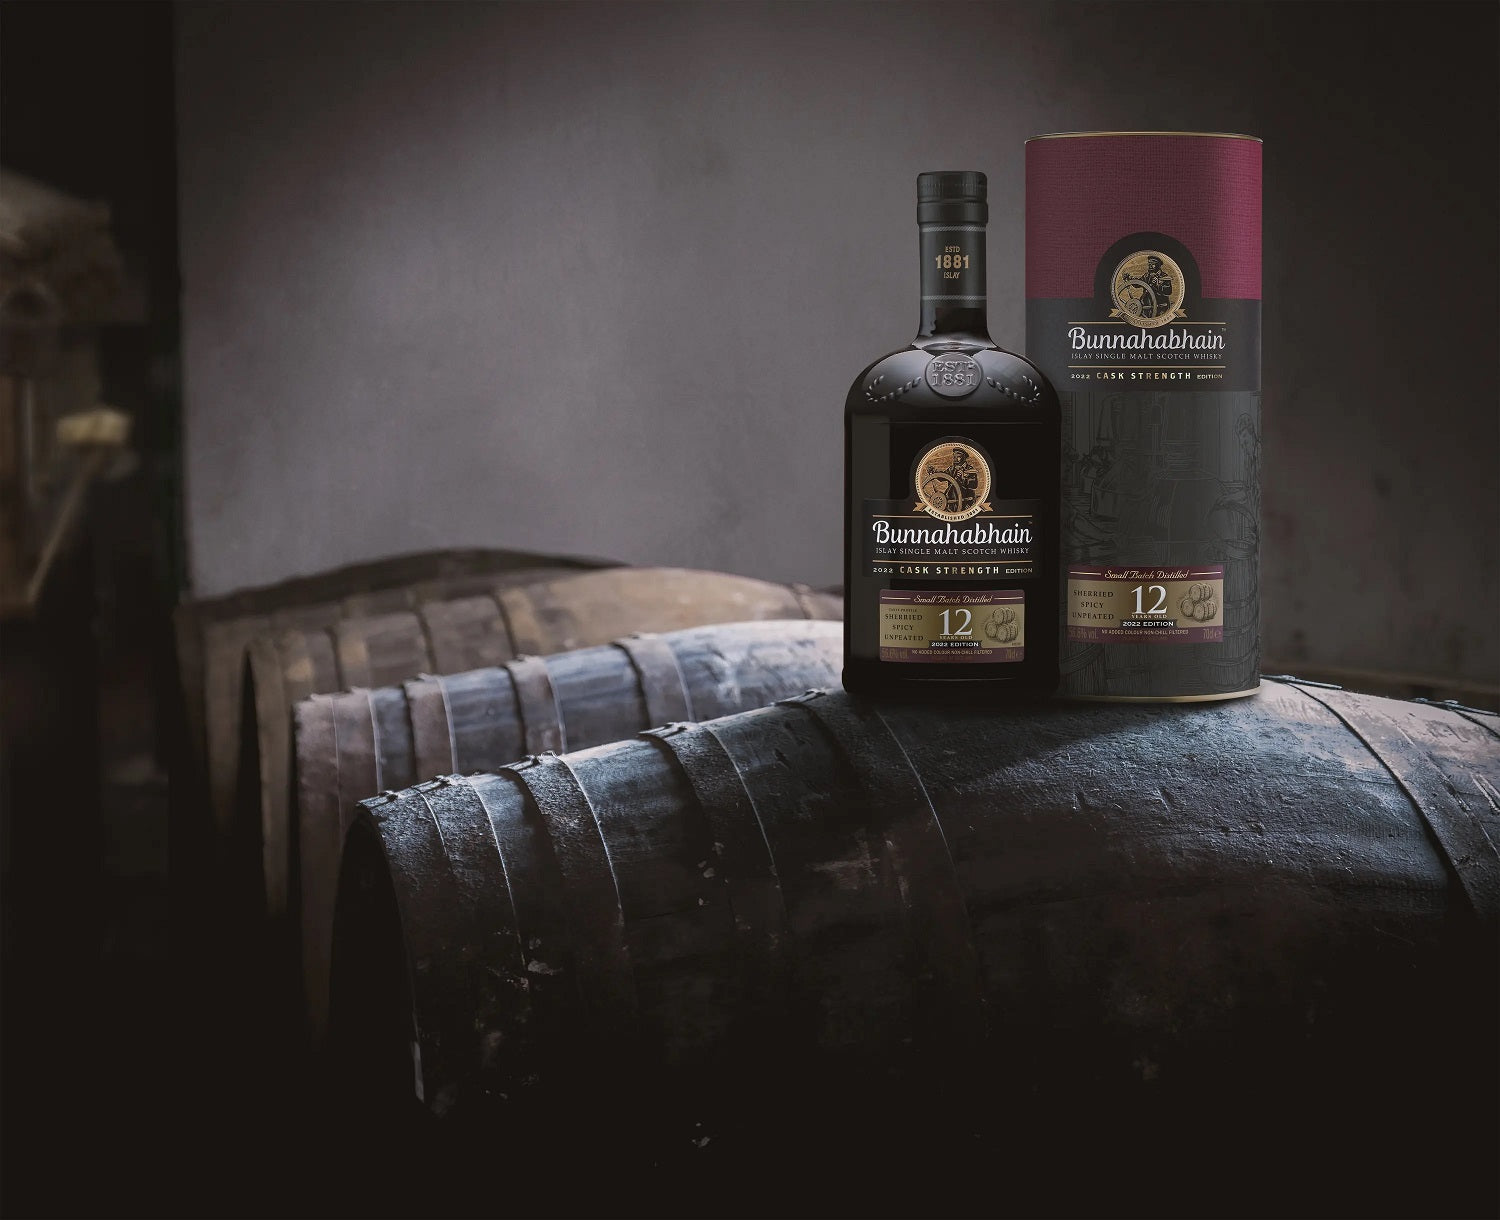 Unveiling The Second Annual Release: The Bunnahabhain 12 Year Old Cask Strength